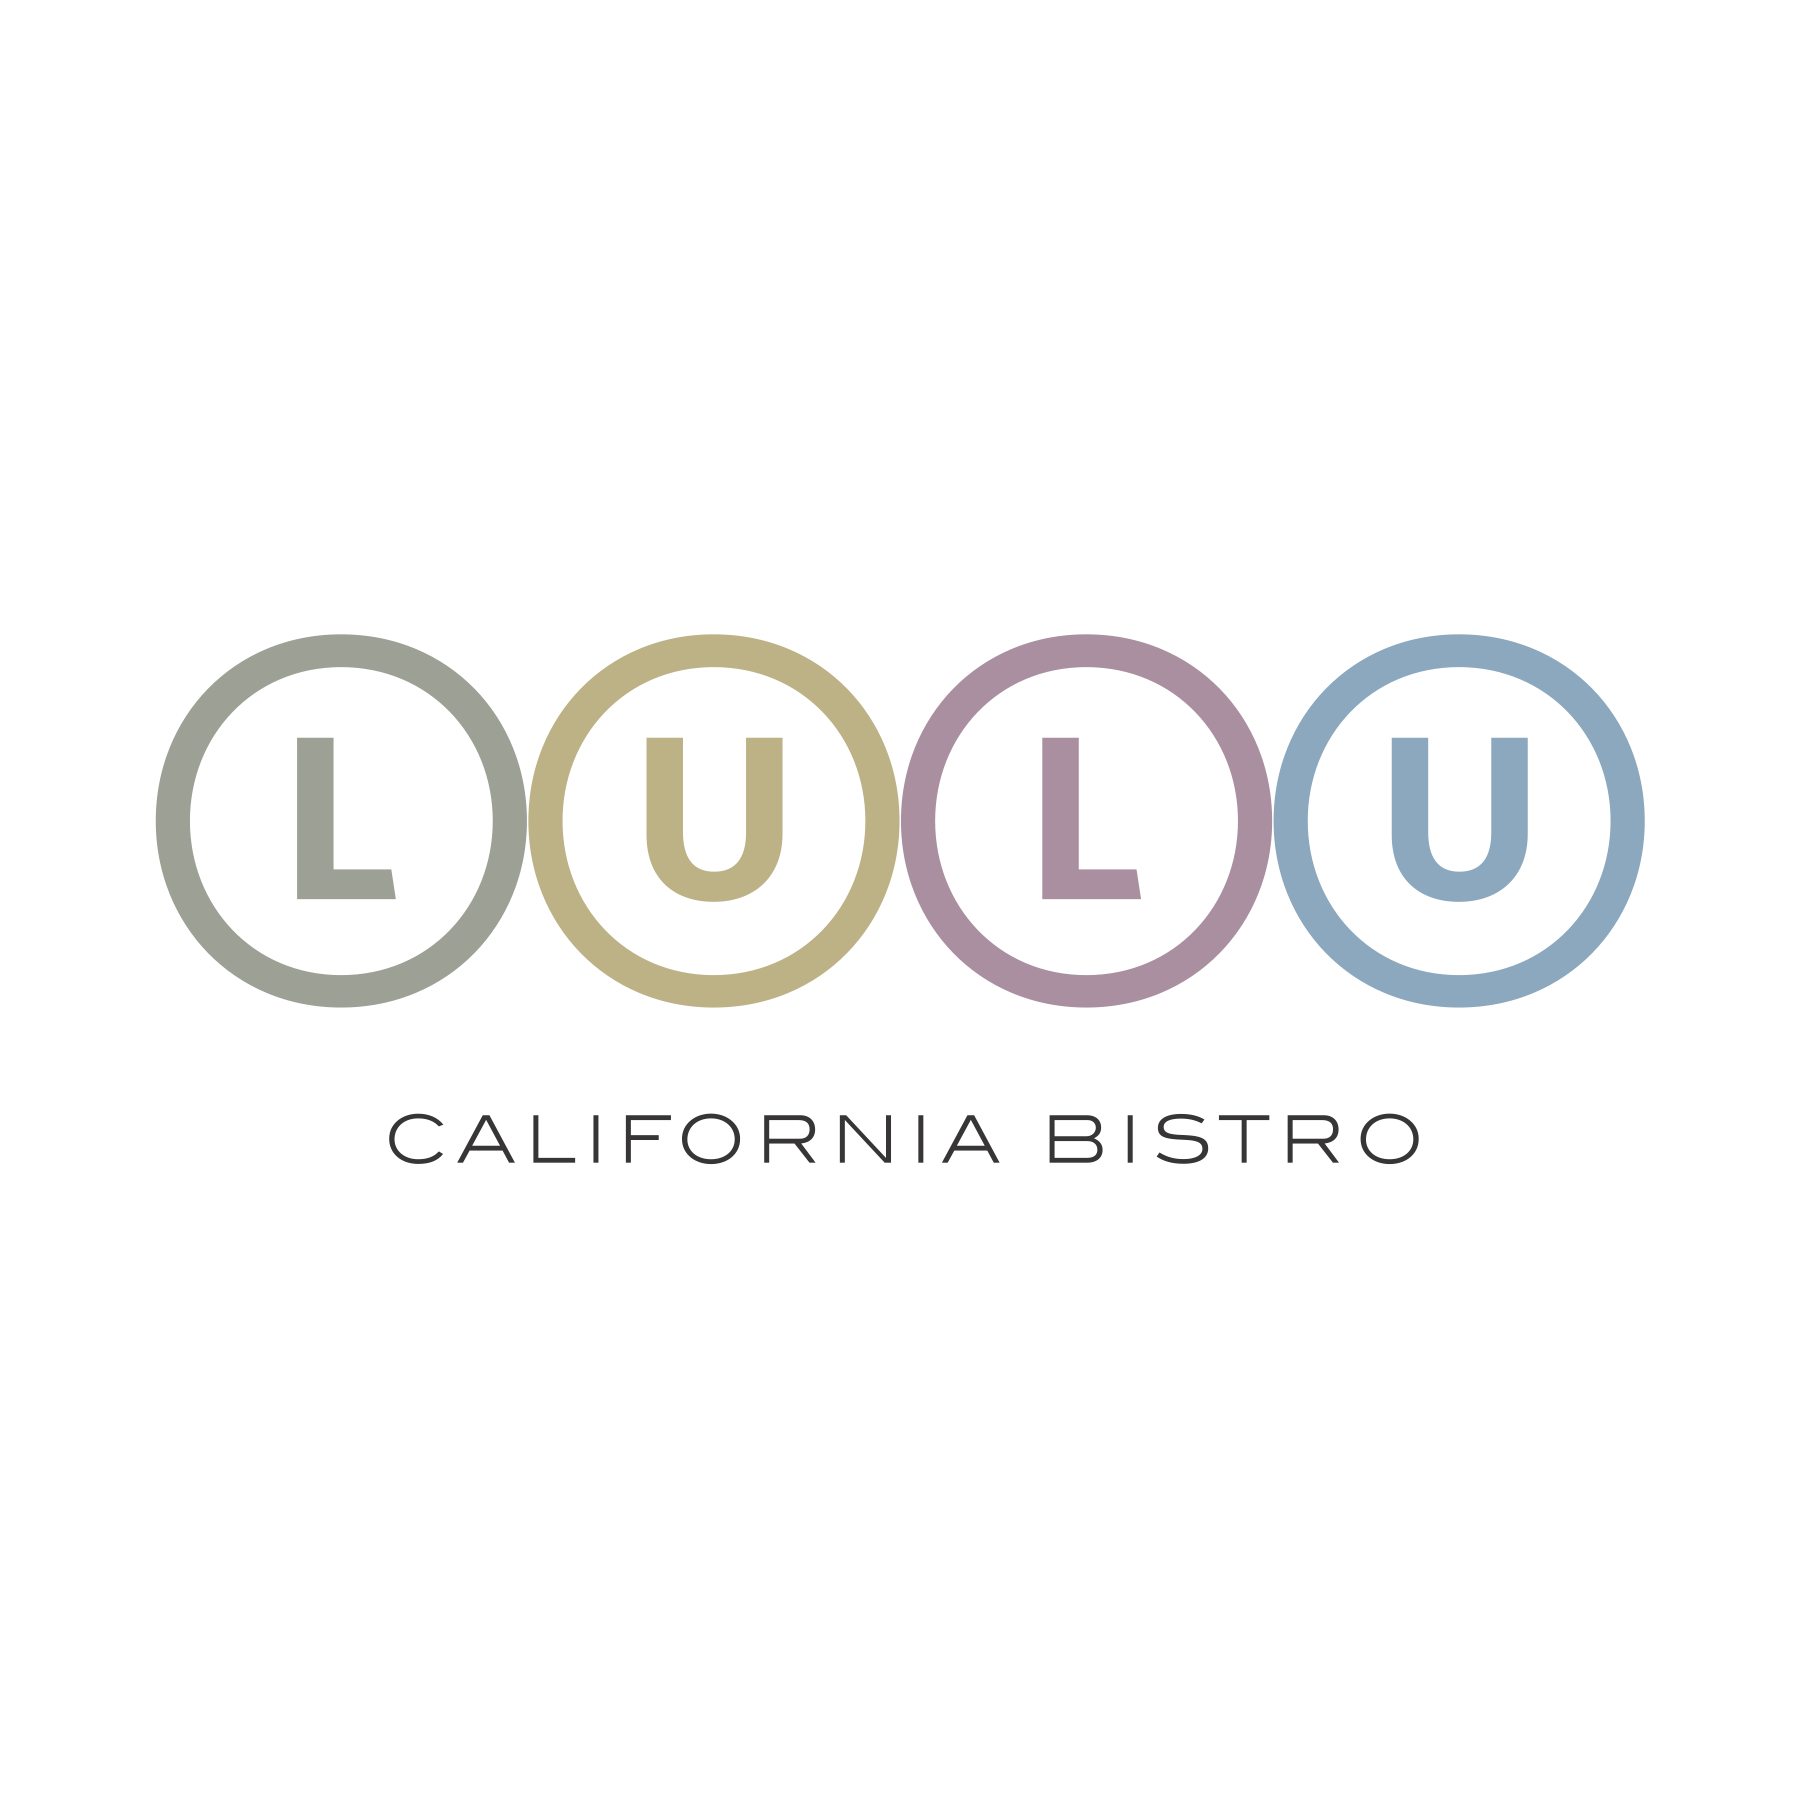 Palm Springs newest and hippest restaurant! We offer generous portions at reasonable prices with friendly service. There's always a party at LuLu!